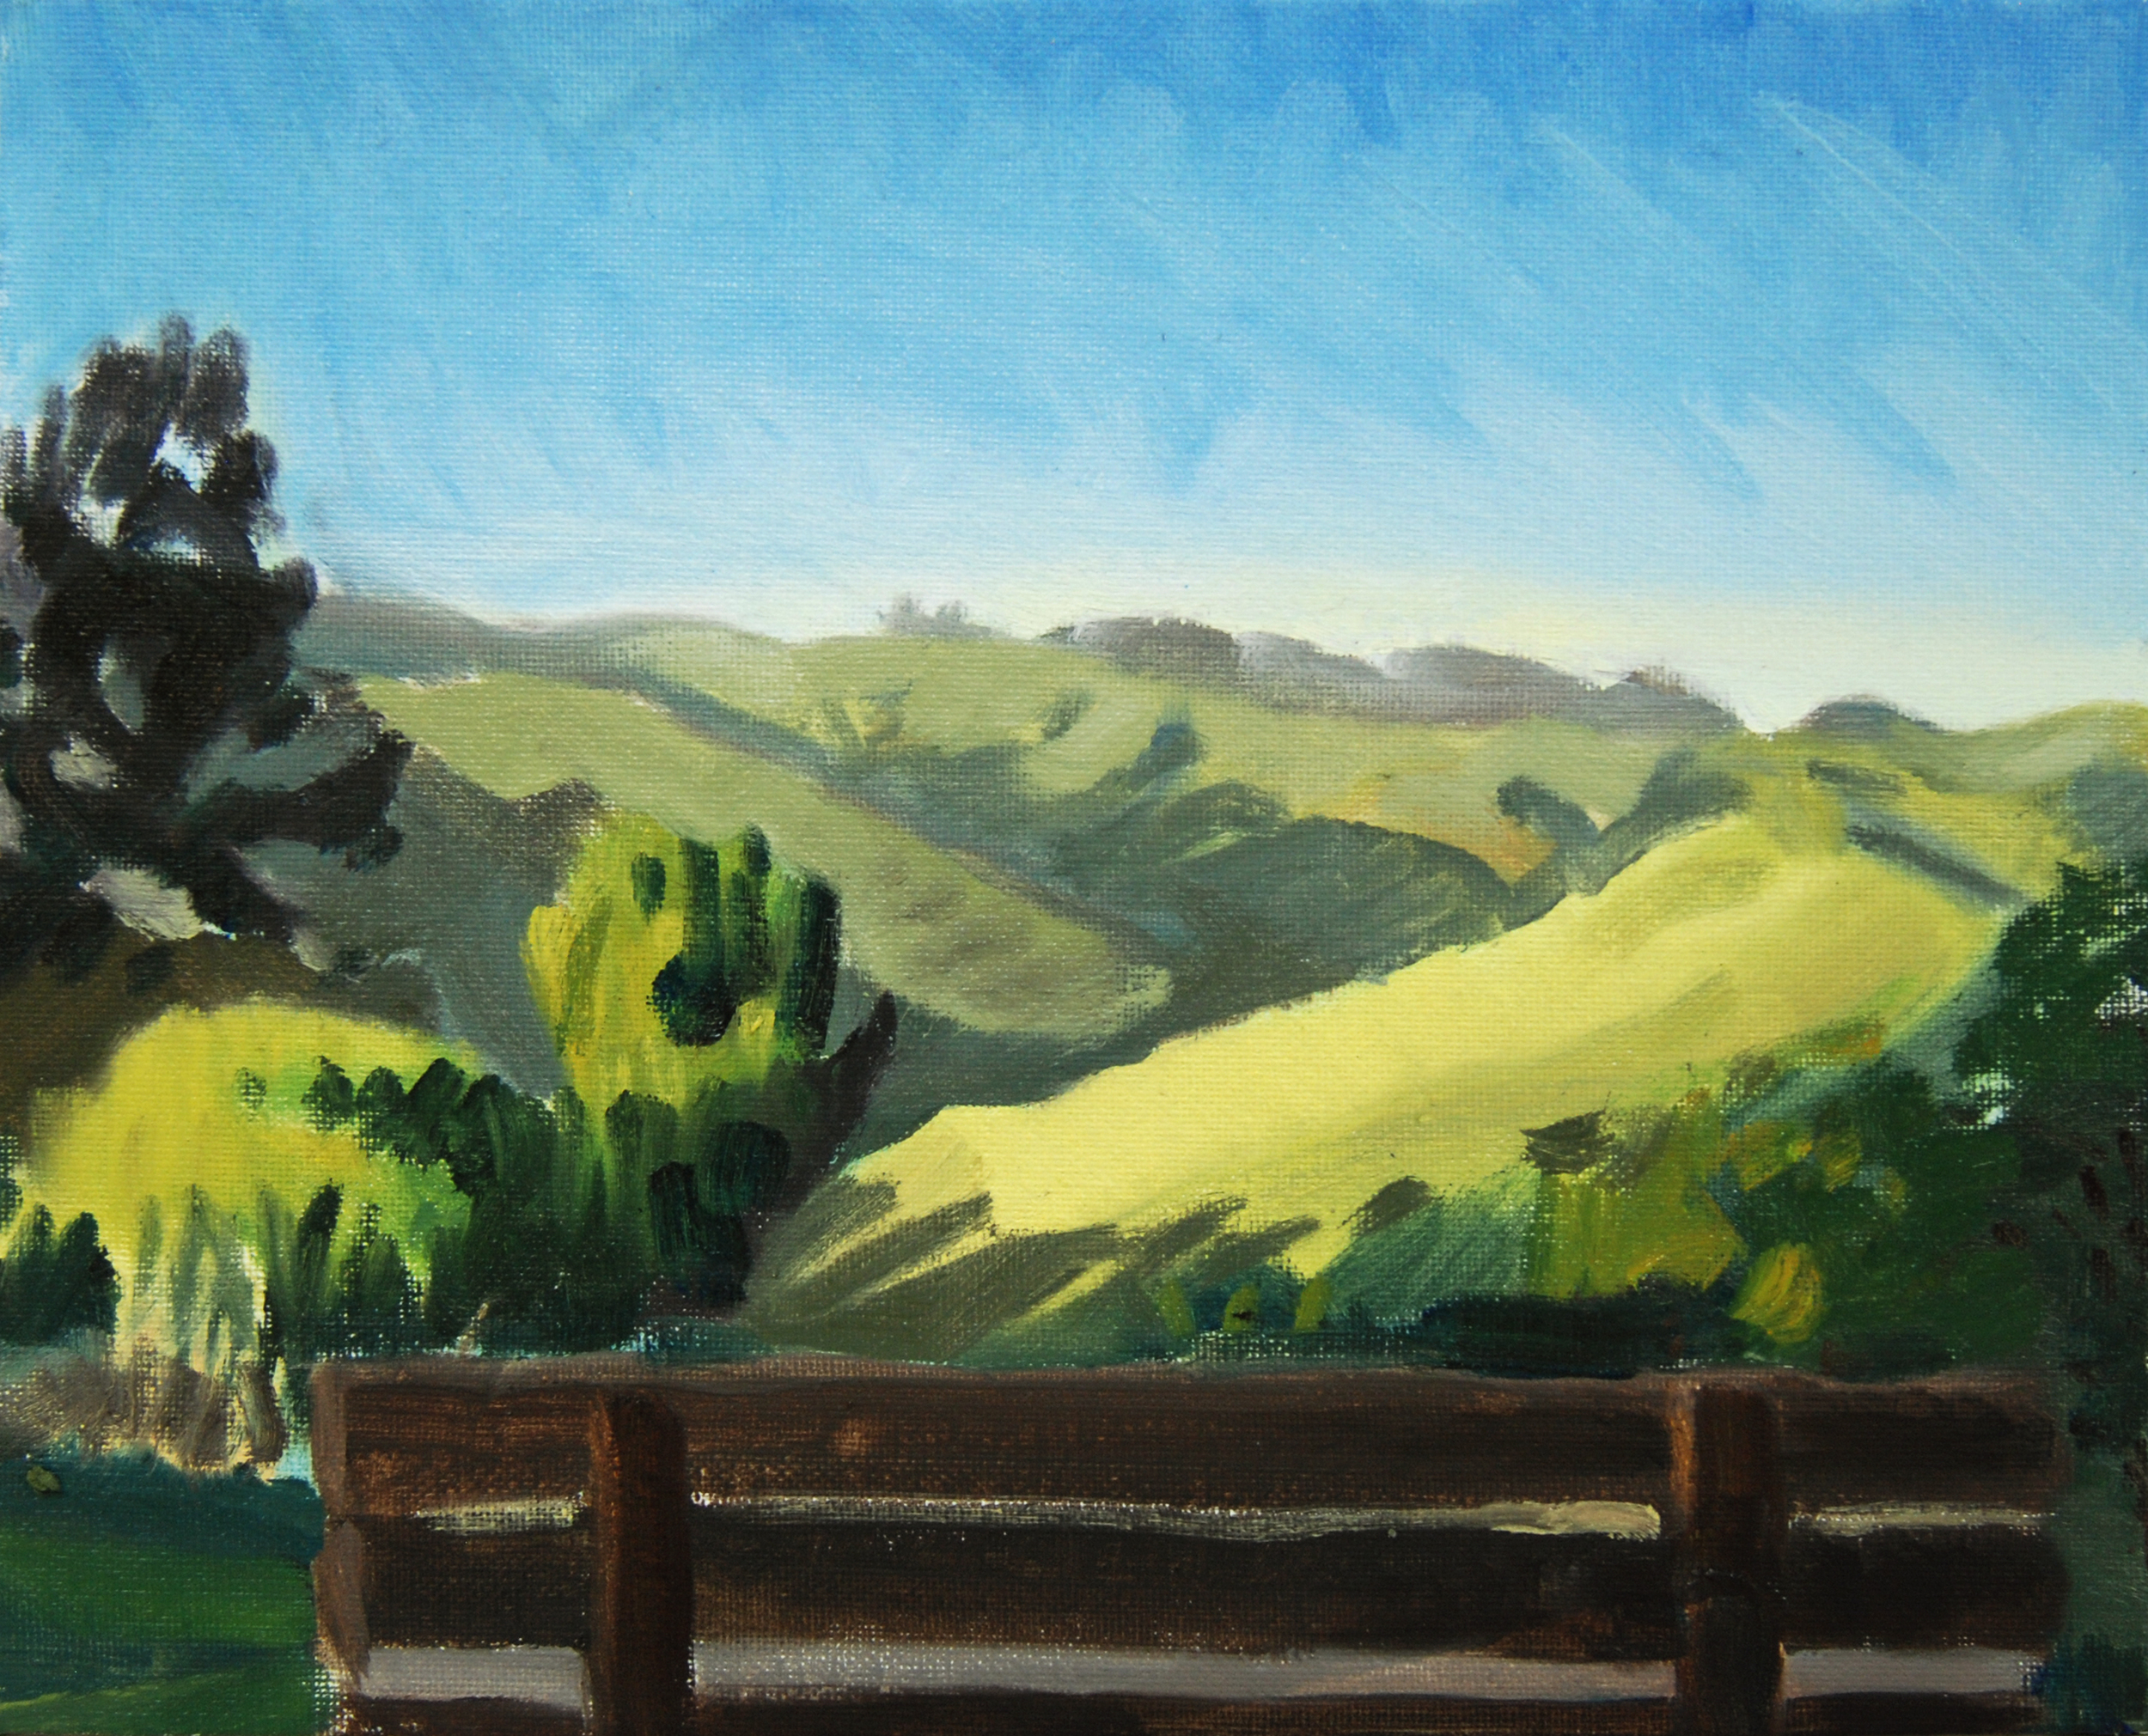   Berkeley Hills, Looking Inland , 8 x 10 in.  Oil on canvas. Private collection. (2015) 